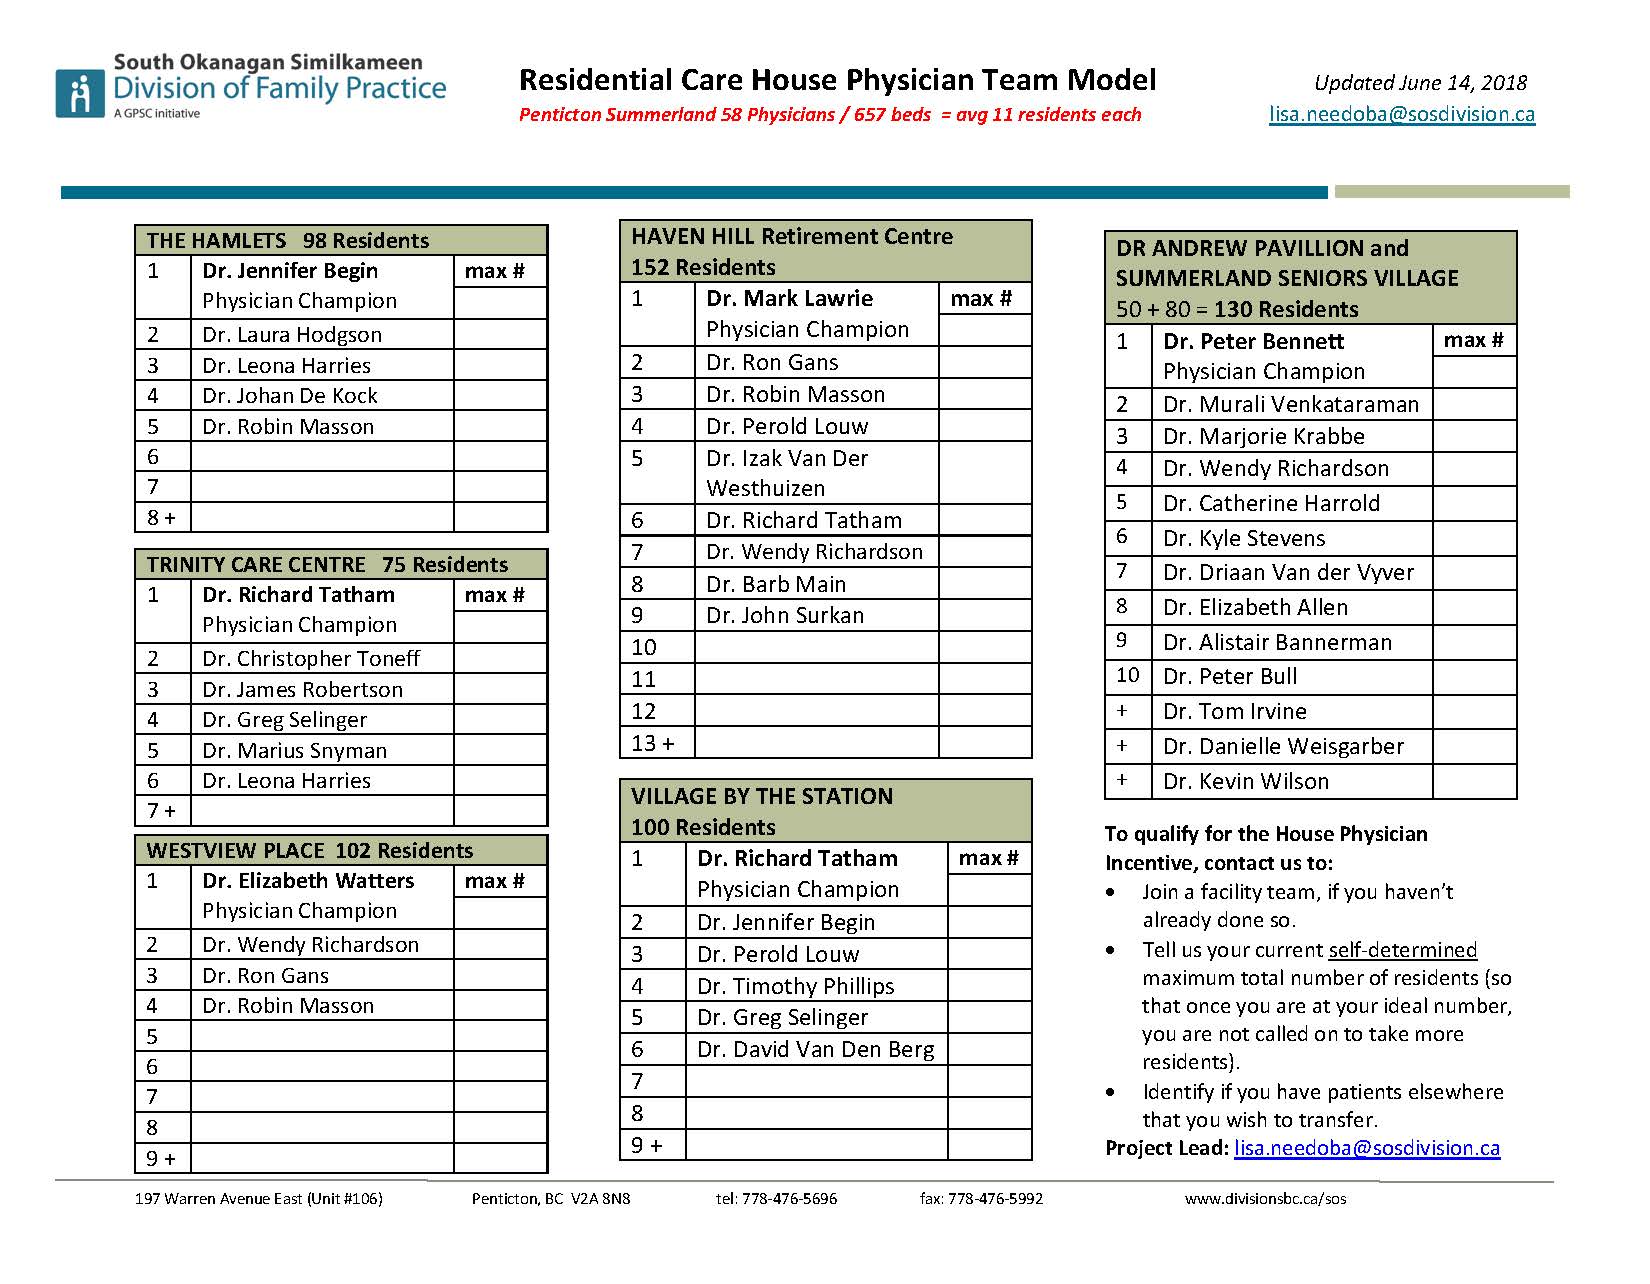 Residential Care - House Physician Model